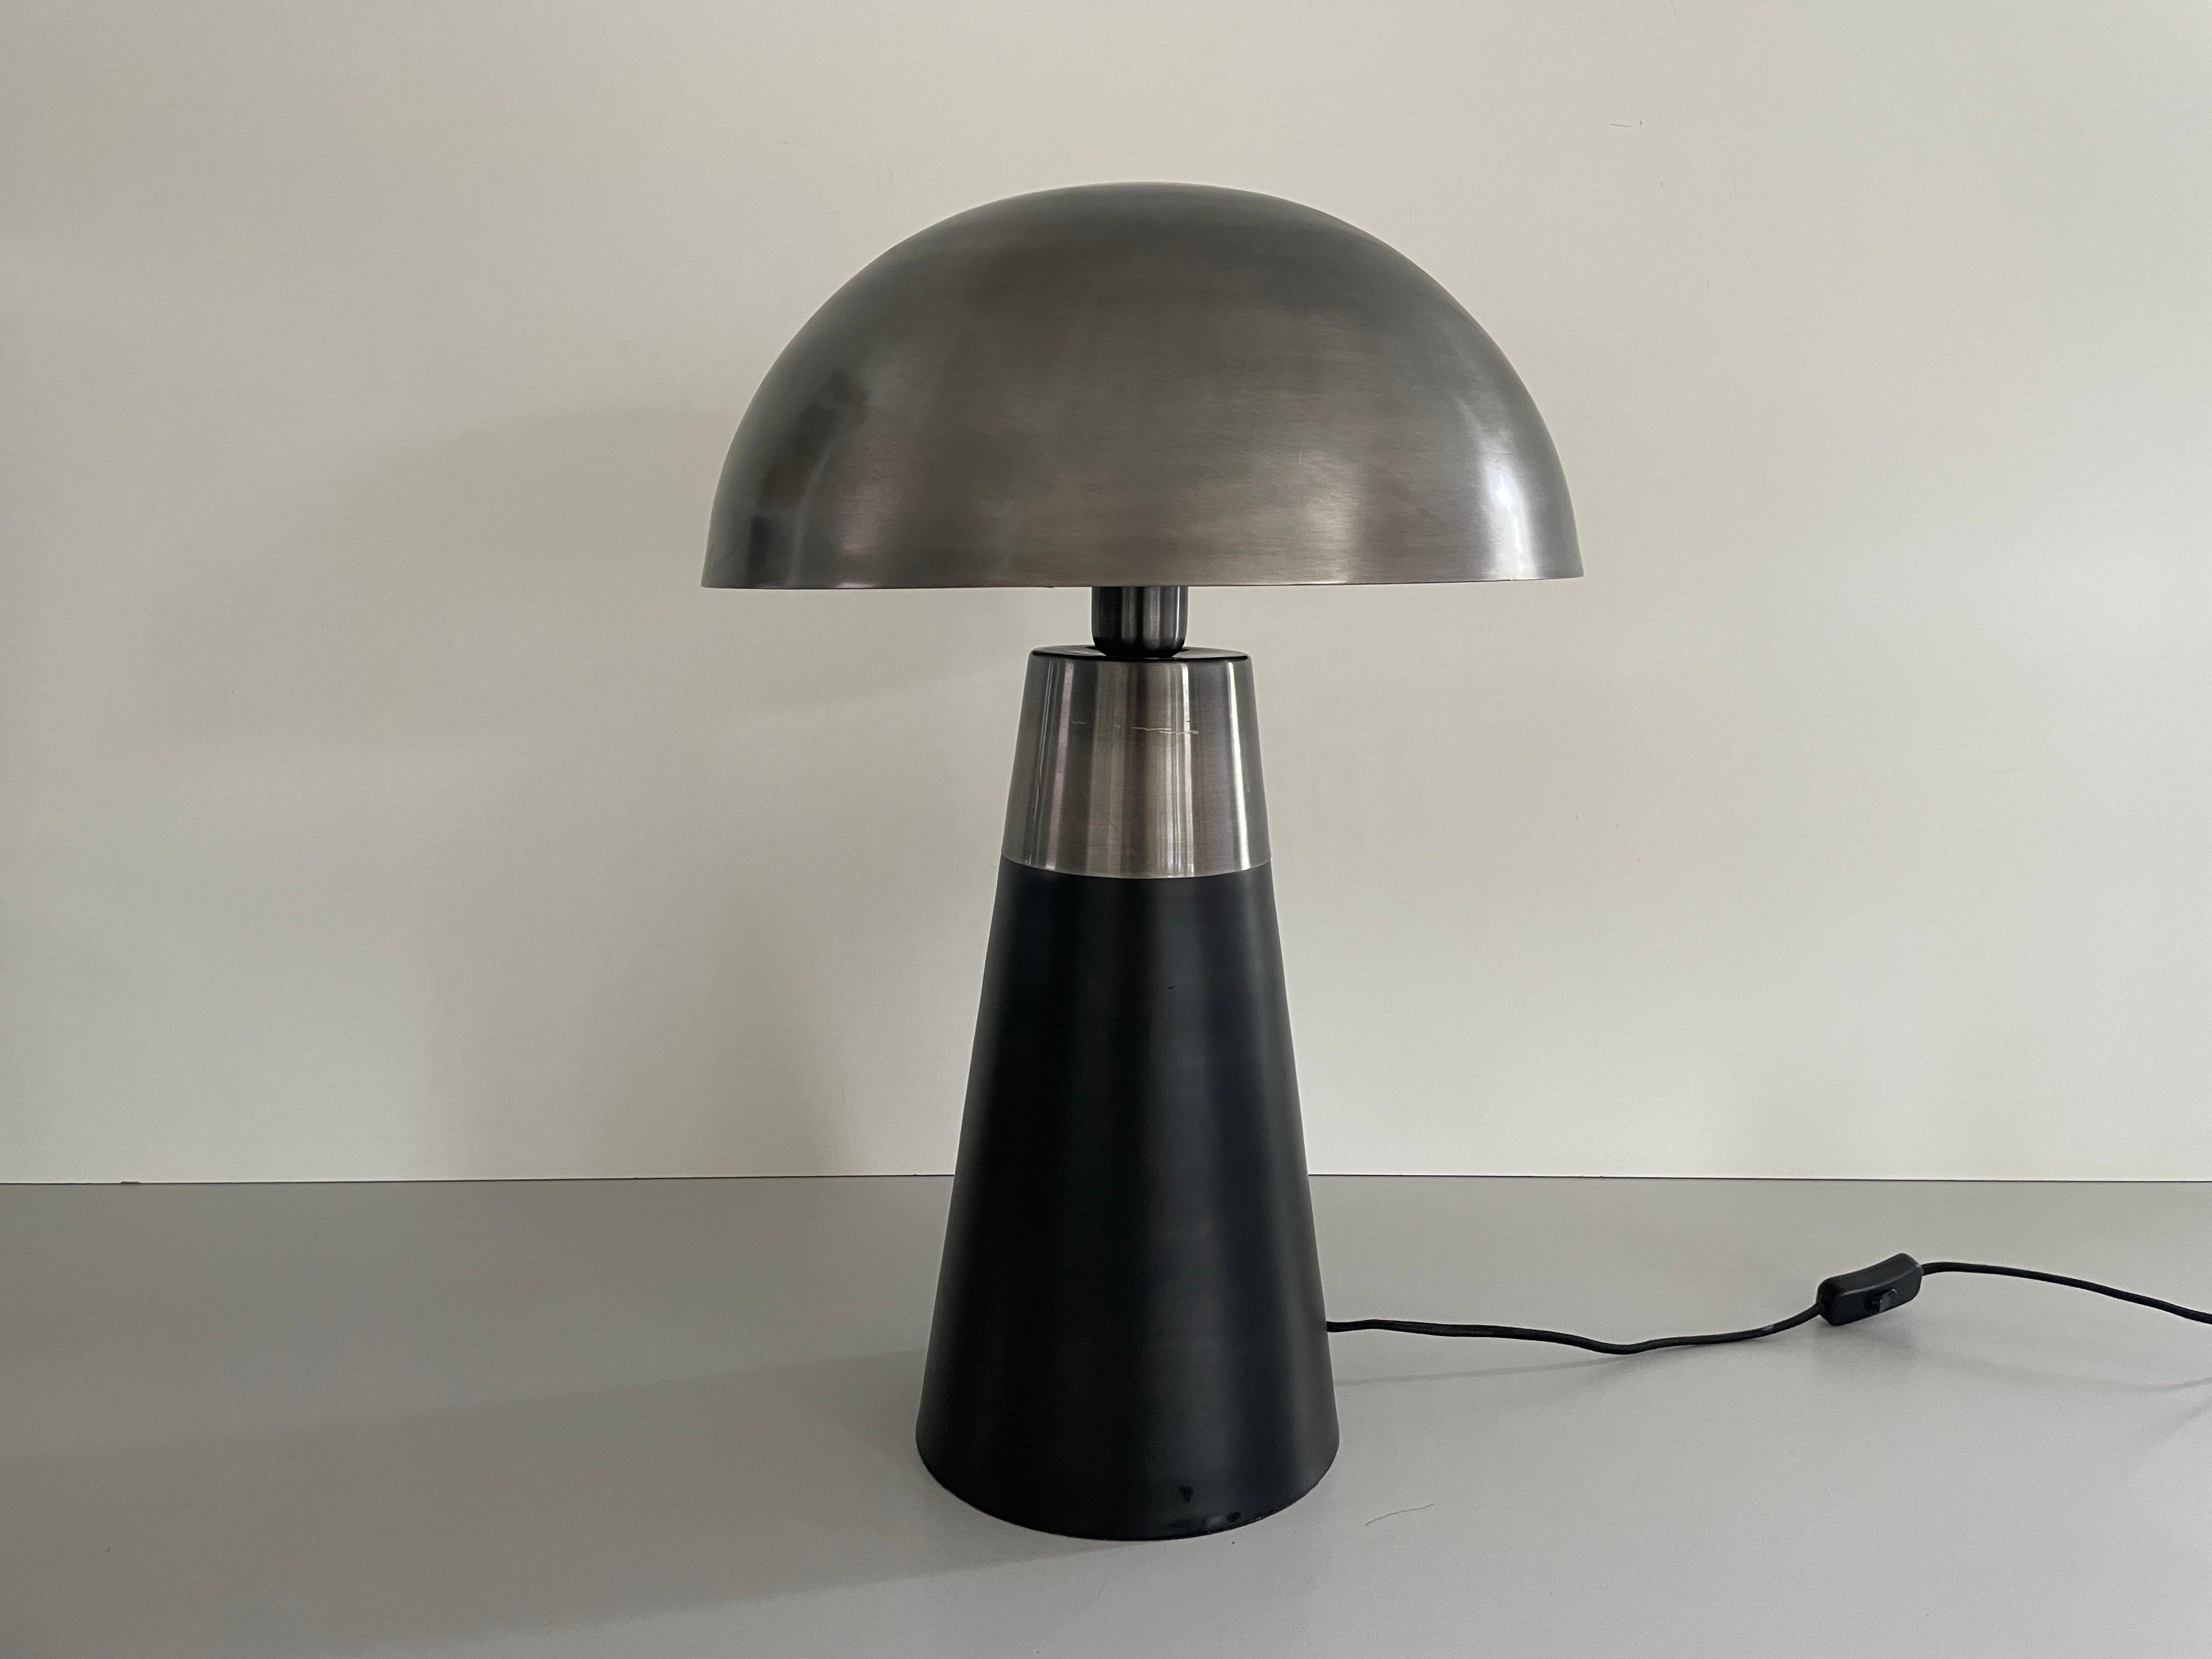 Muschroom and Conic Design Large Table Lamp by LAMBERT, 1980s, Germany In Excellent Condition For Sale In Hagenbach, DE